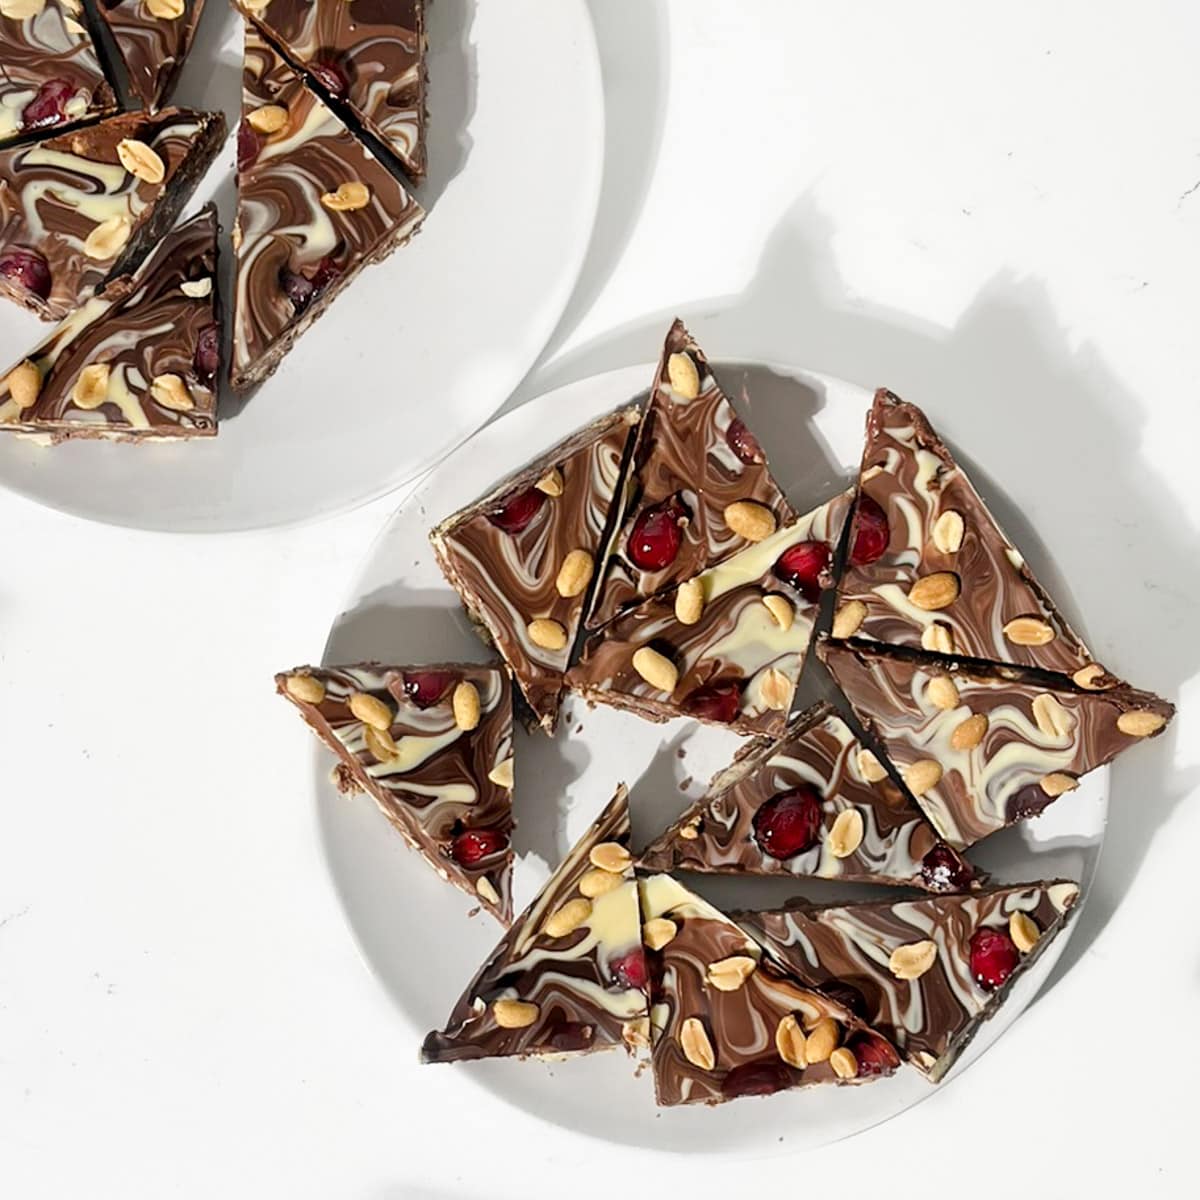 Chocolate tiffin triangles on a white plate.